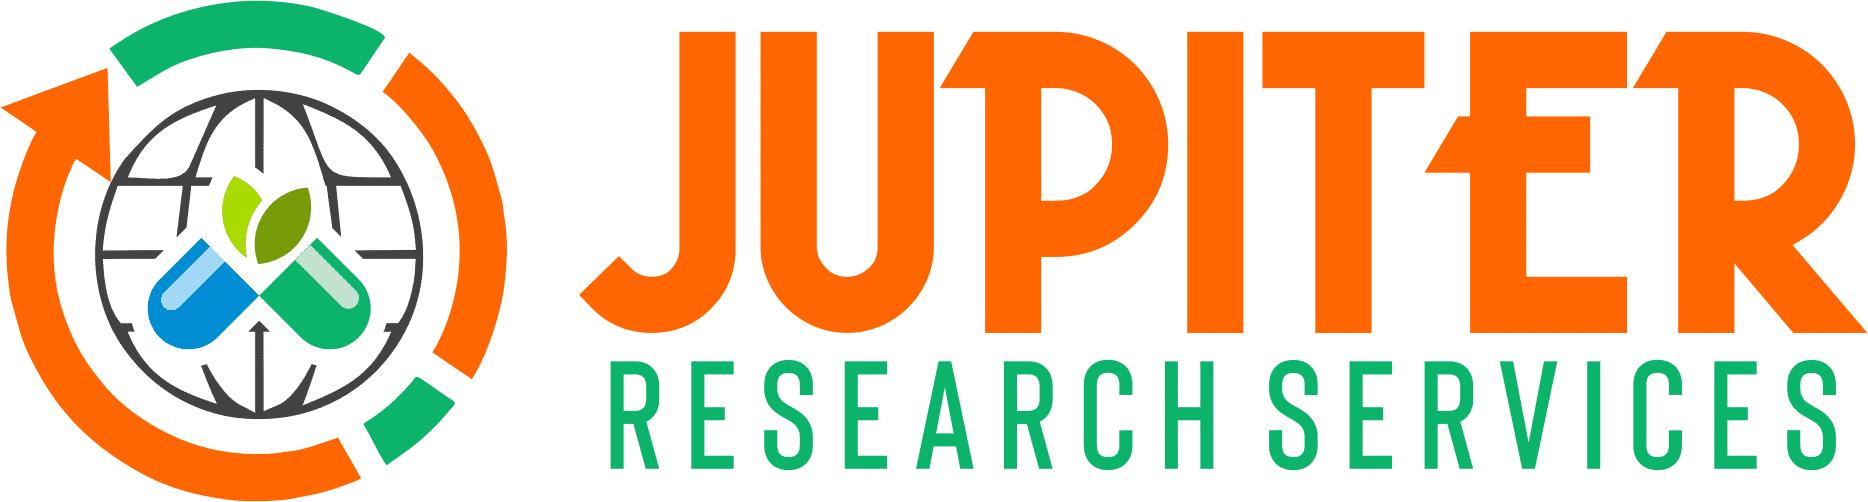 JUPITER RESEARCH SERVICES